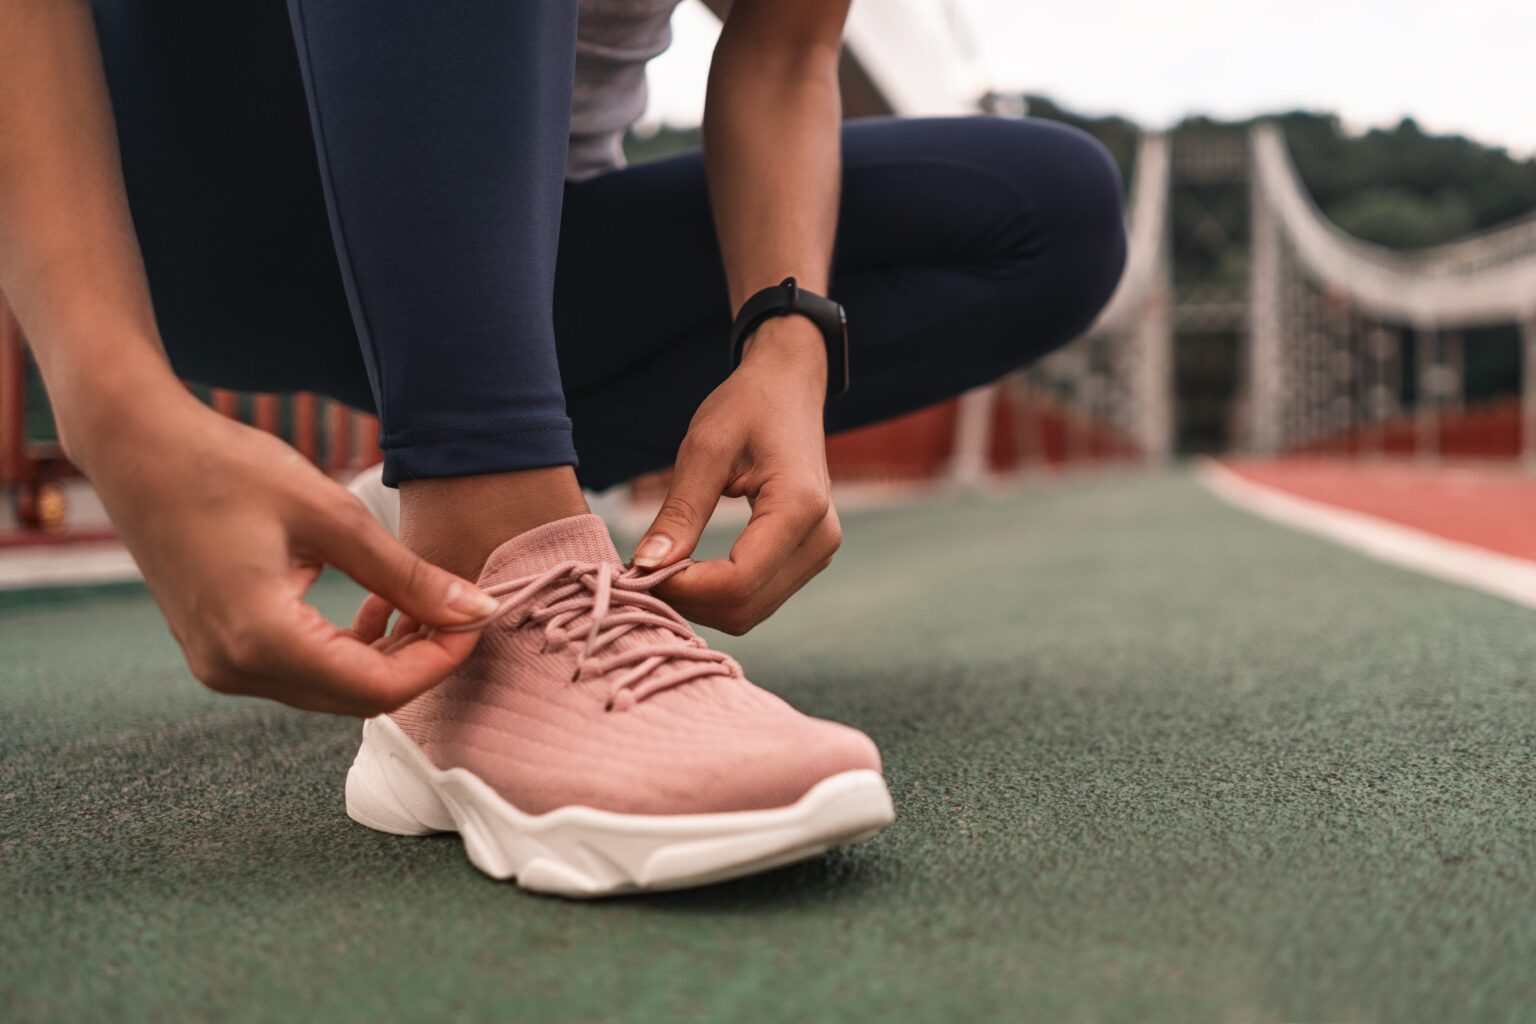 The shoes you wear might not be the most comfortable, but these sneakers are. Check out your options to find the perfect pair to walk in all day long.